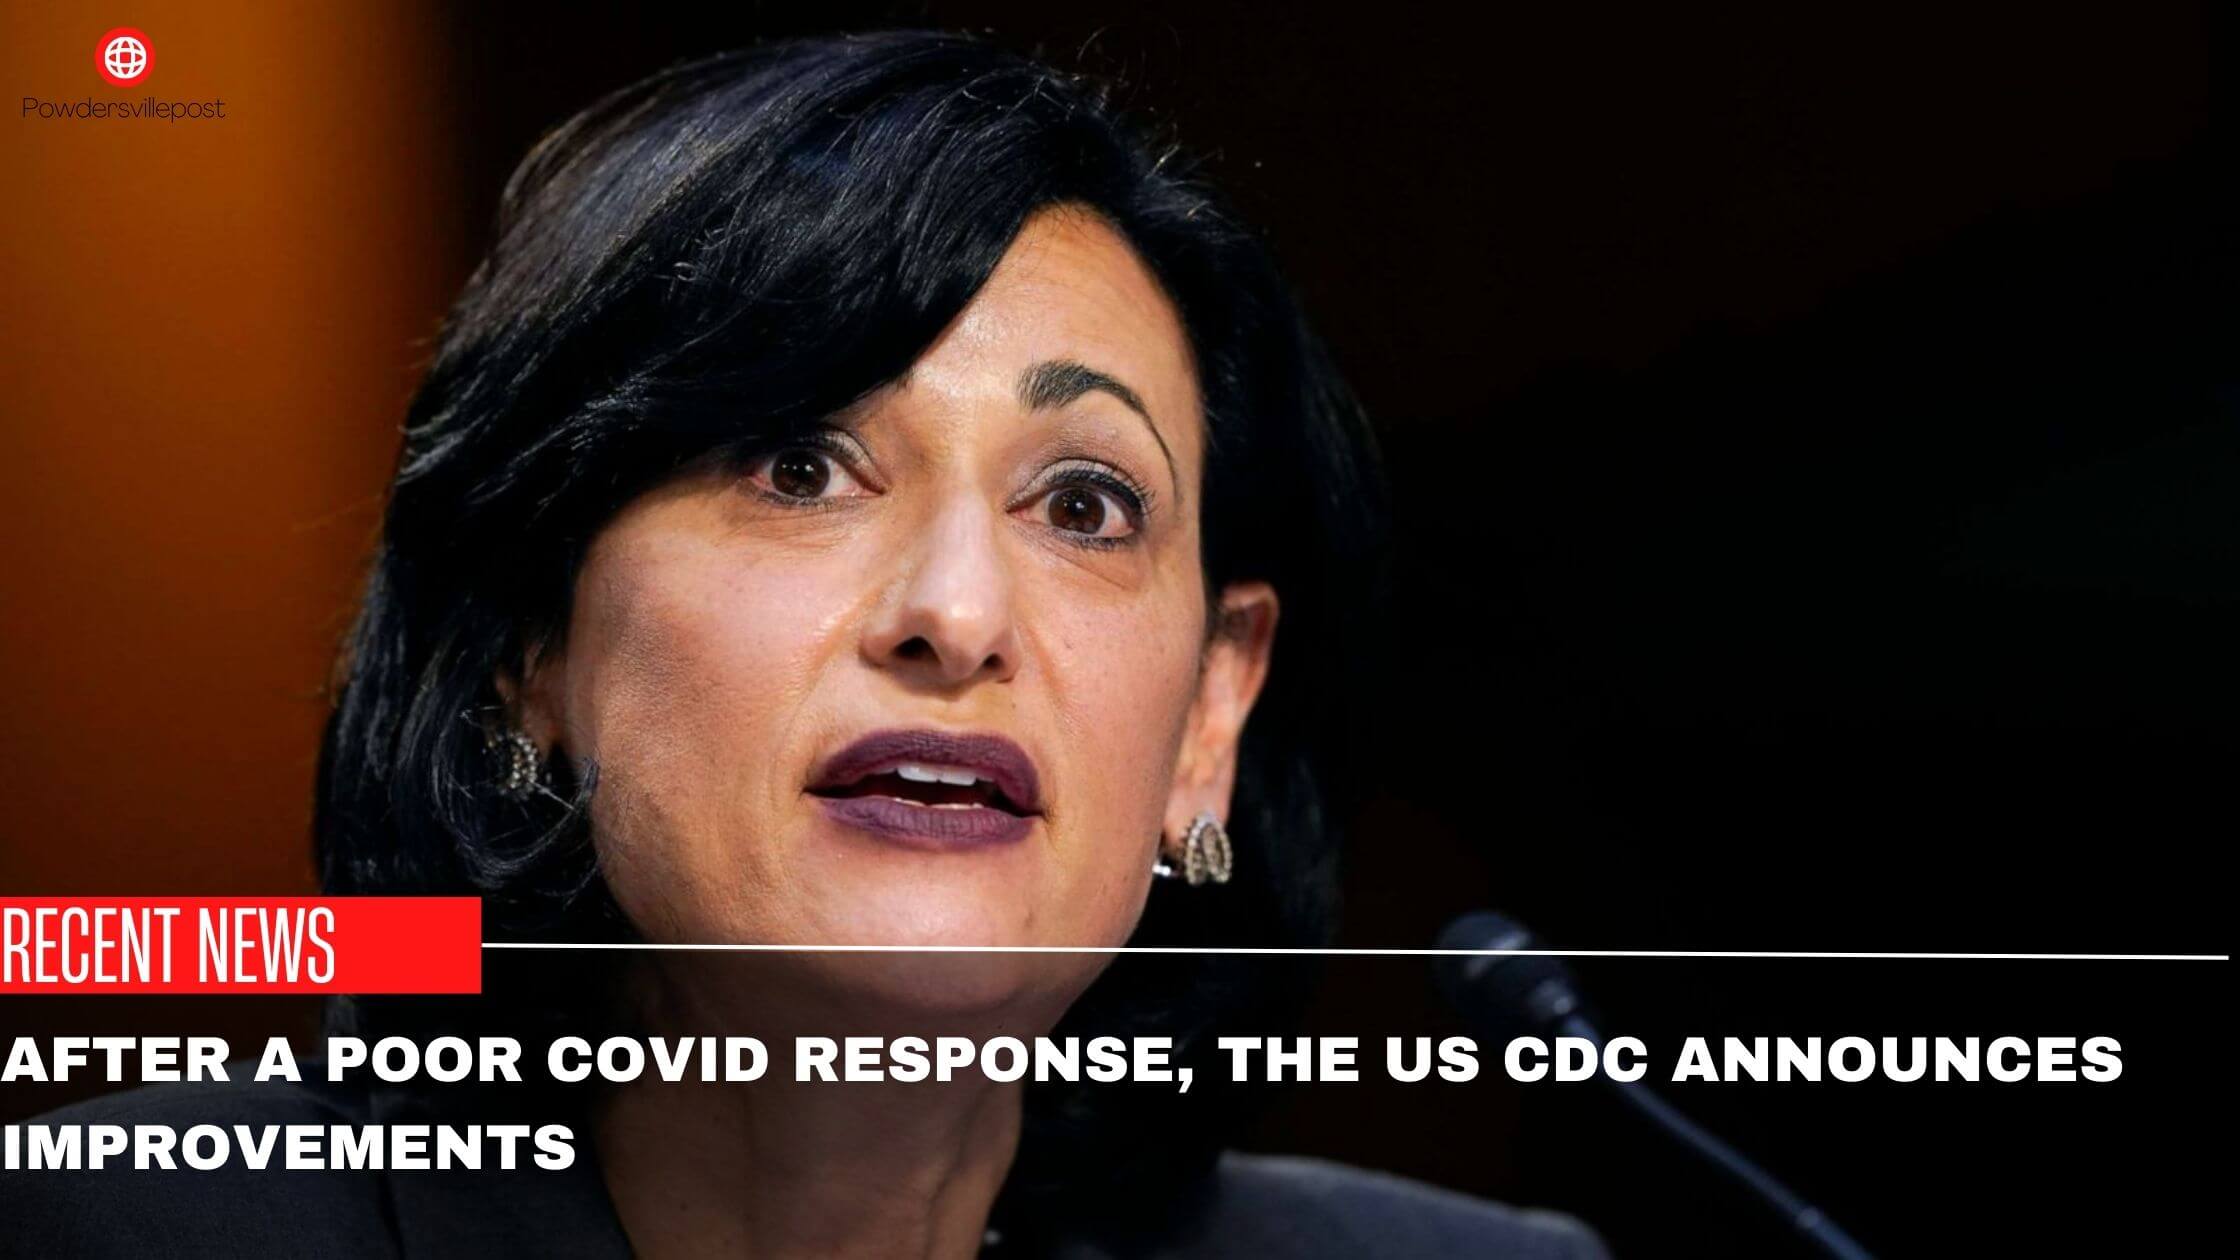 After A Poor COVID Response, The US CDC Announces Improvements